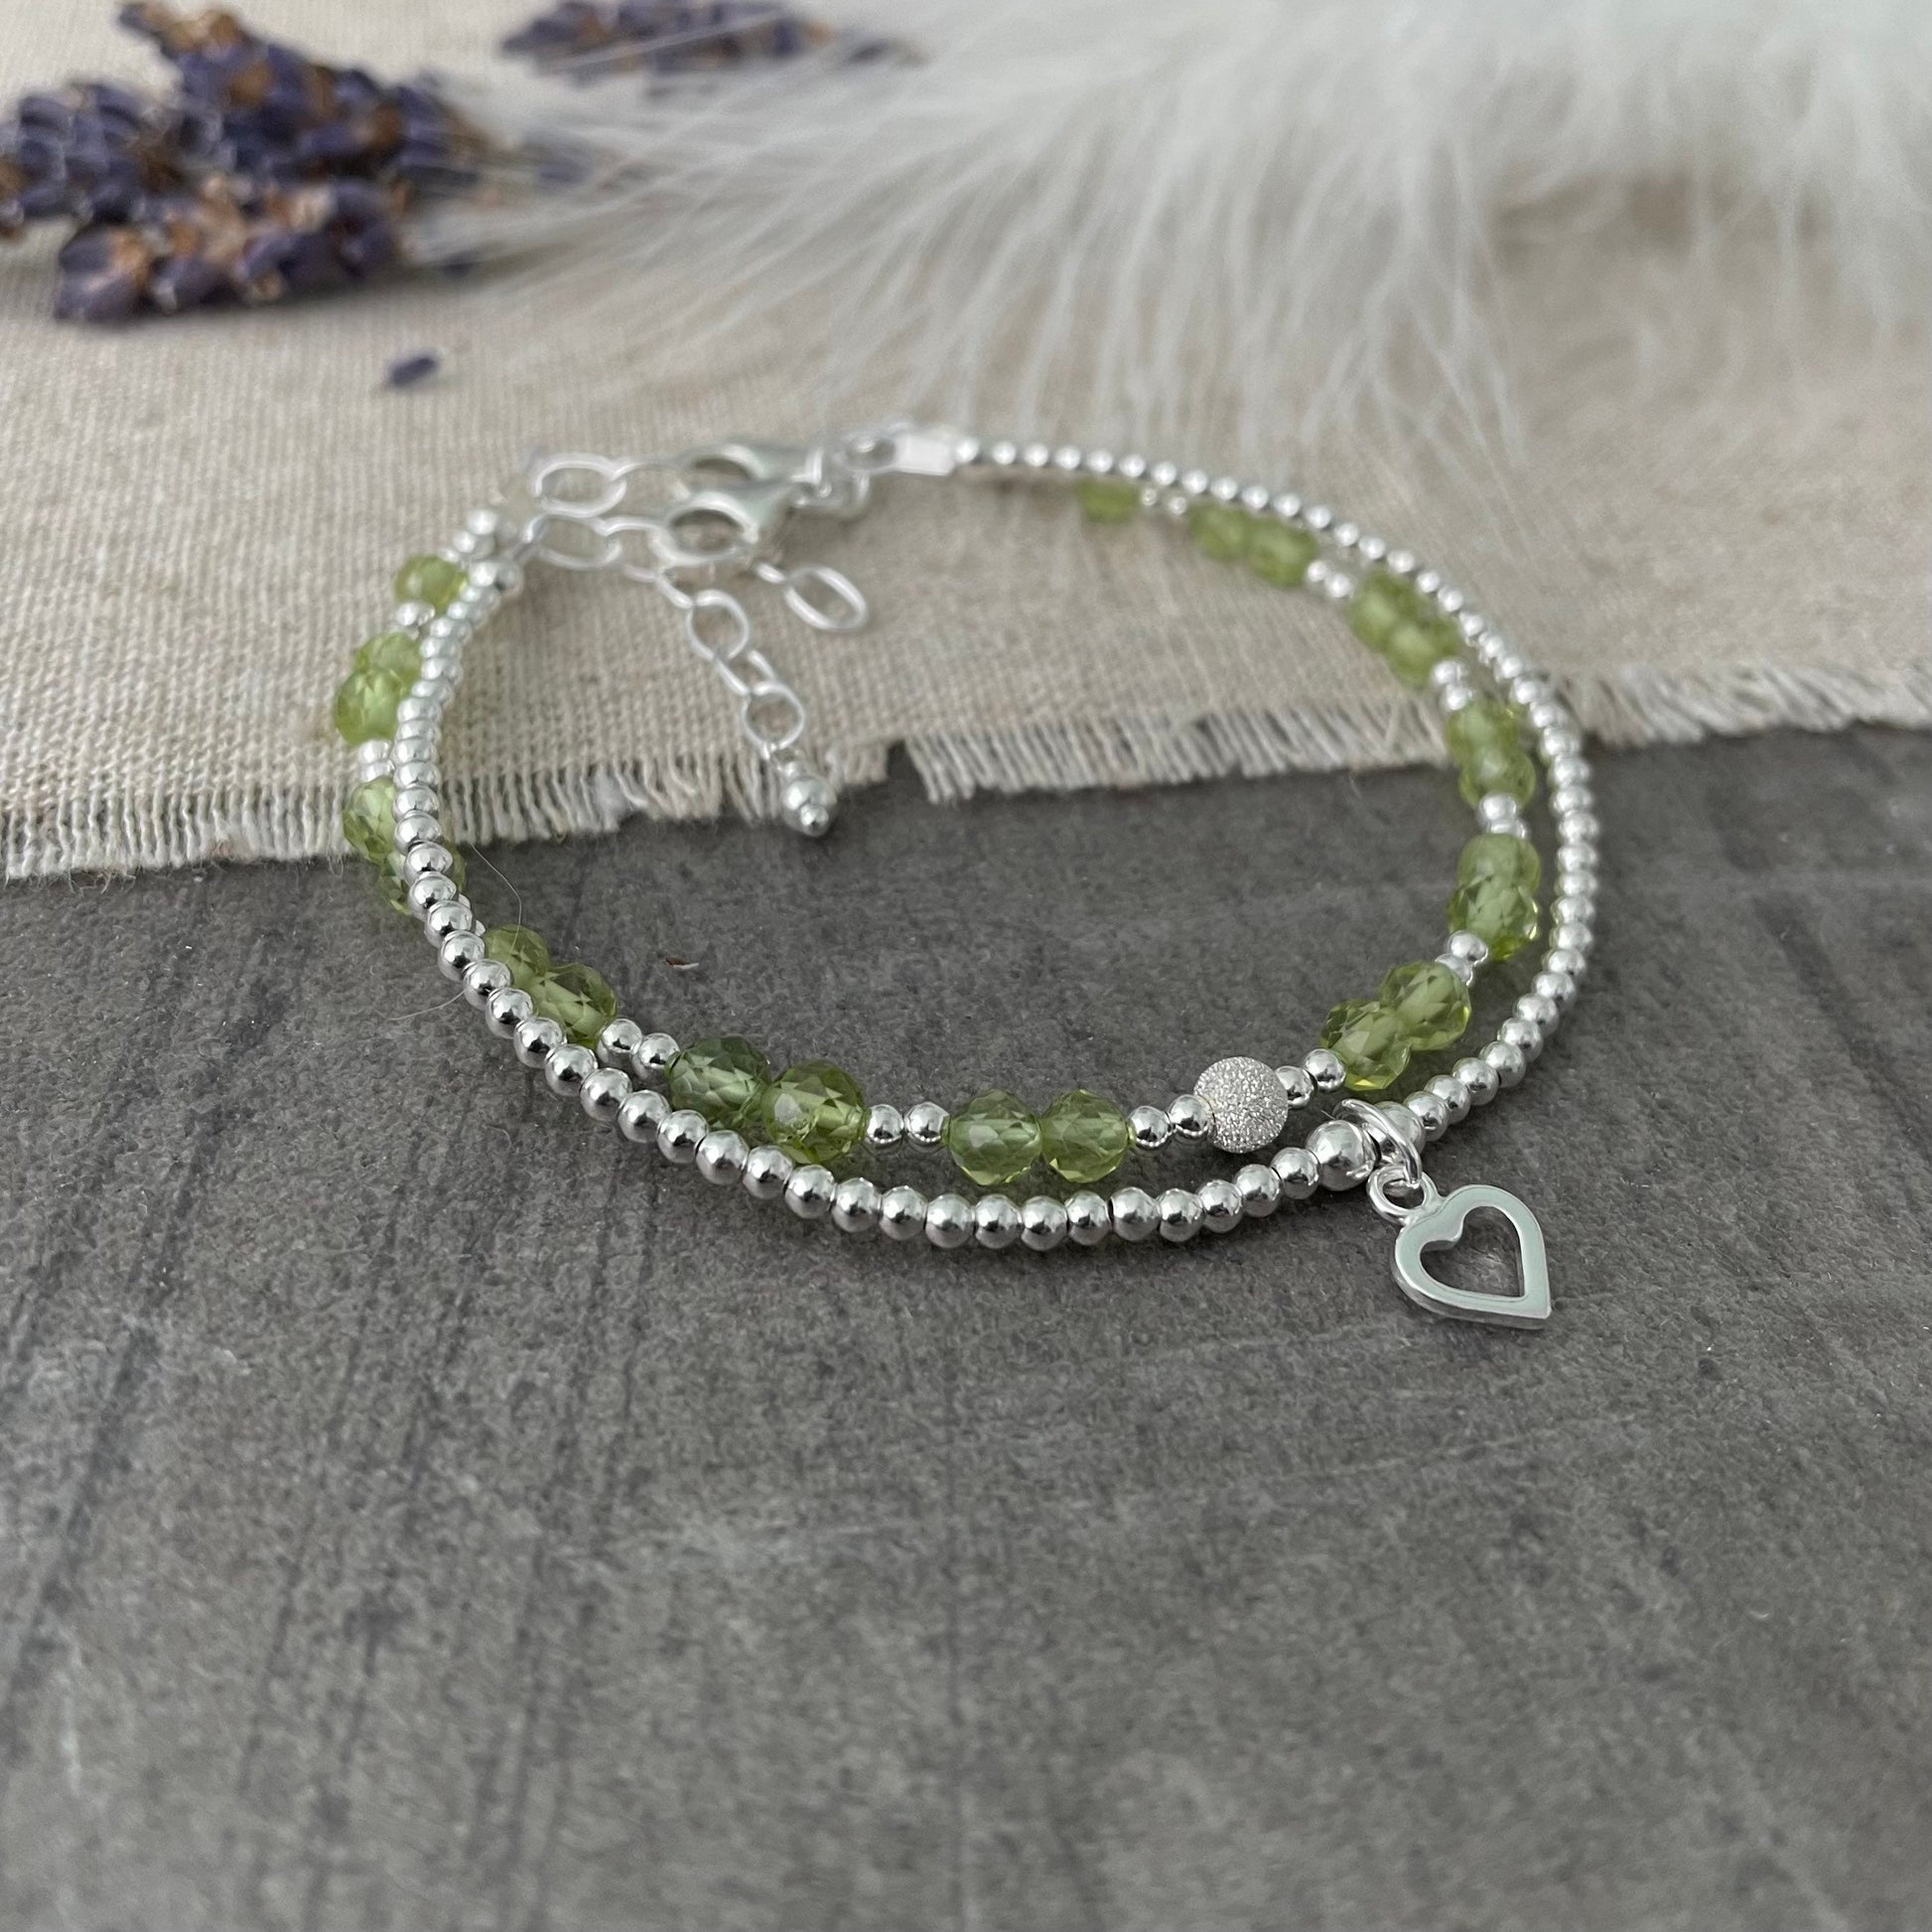 Peridot Bracelet Set made with August Birthstone and Sterling Silver, August Birthday Gift for Women